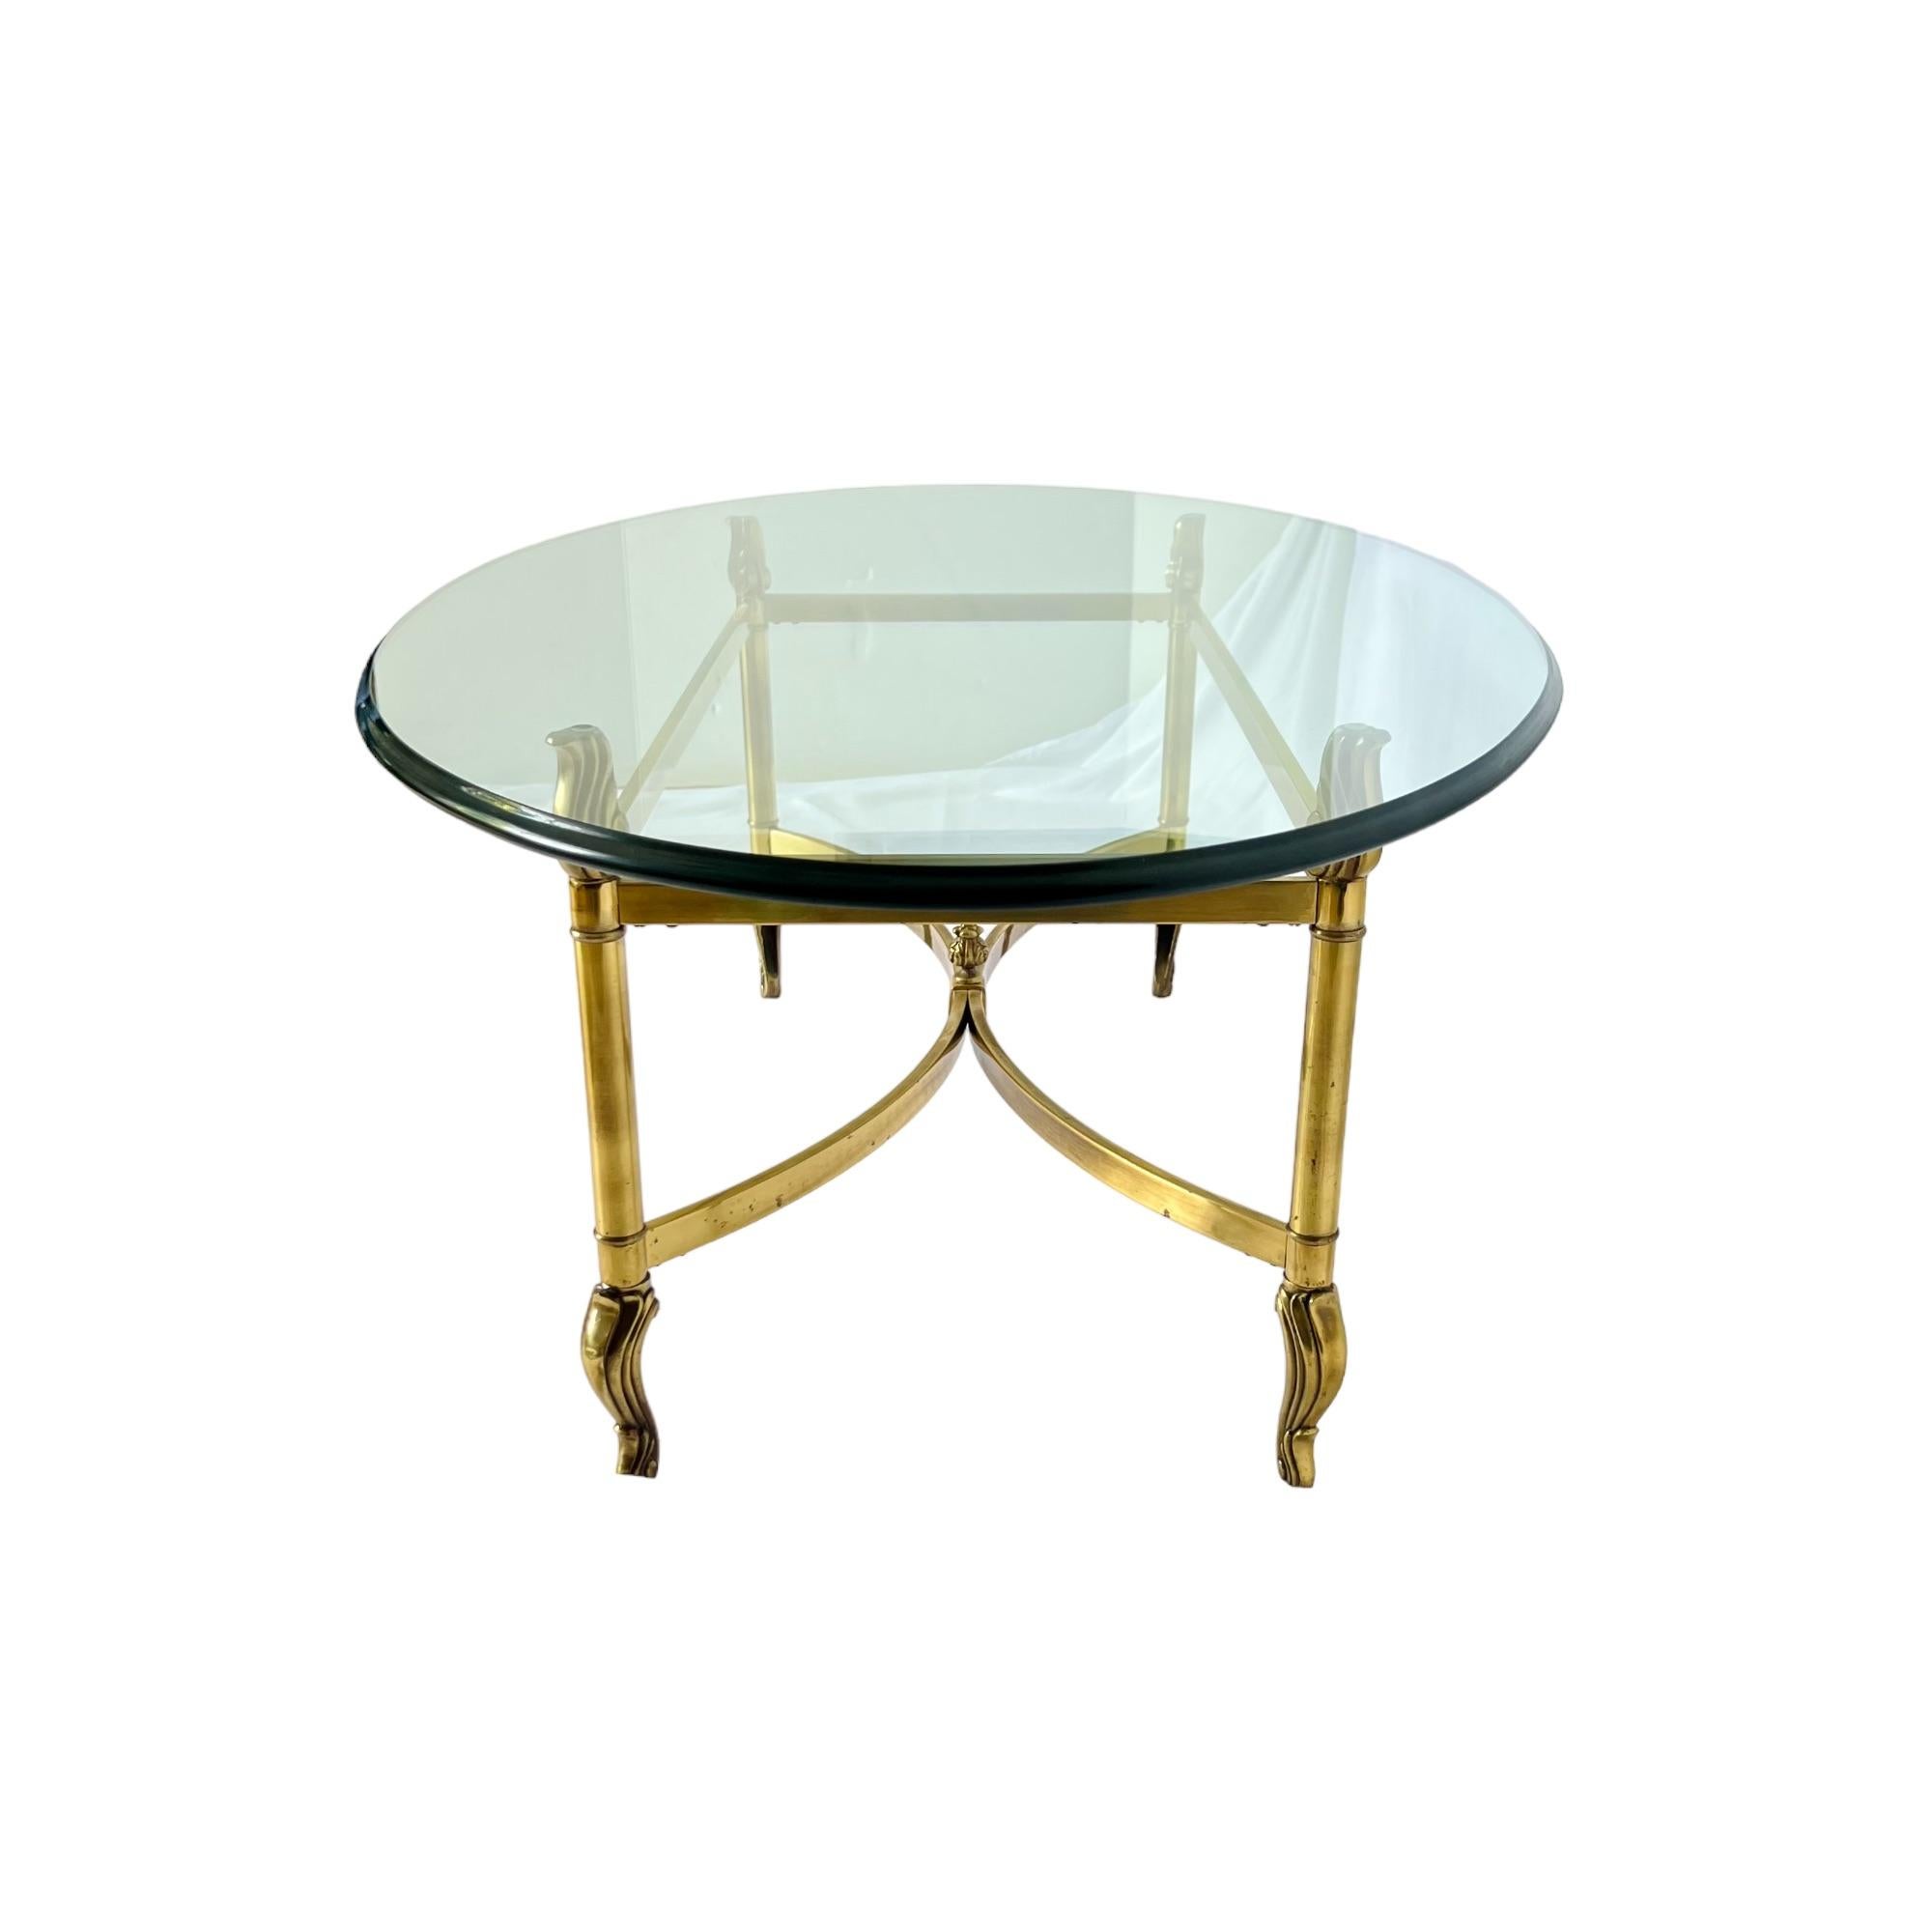 Late 20th Century Neoclassical Brass Oval Glass Top Coffee Table, Late 20th C.